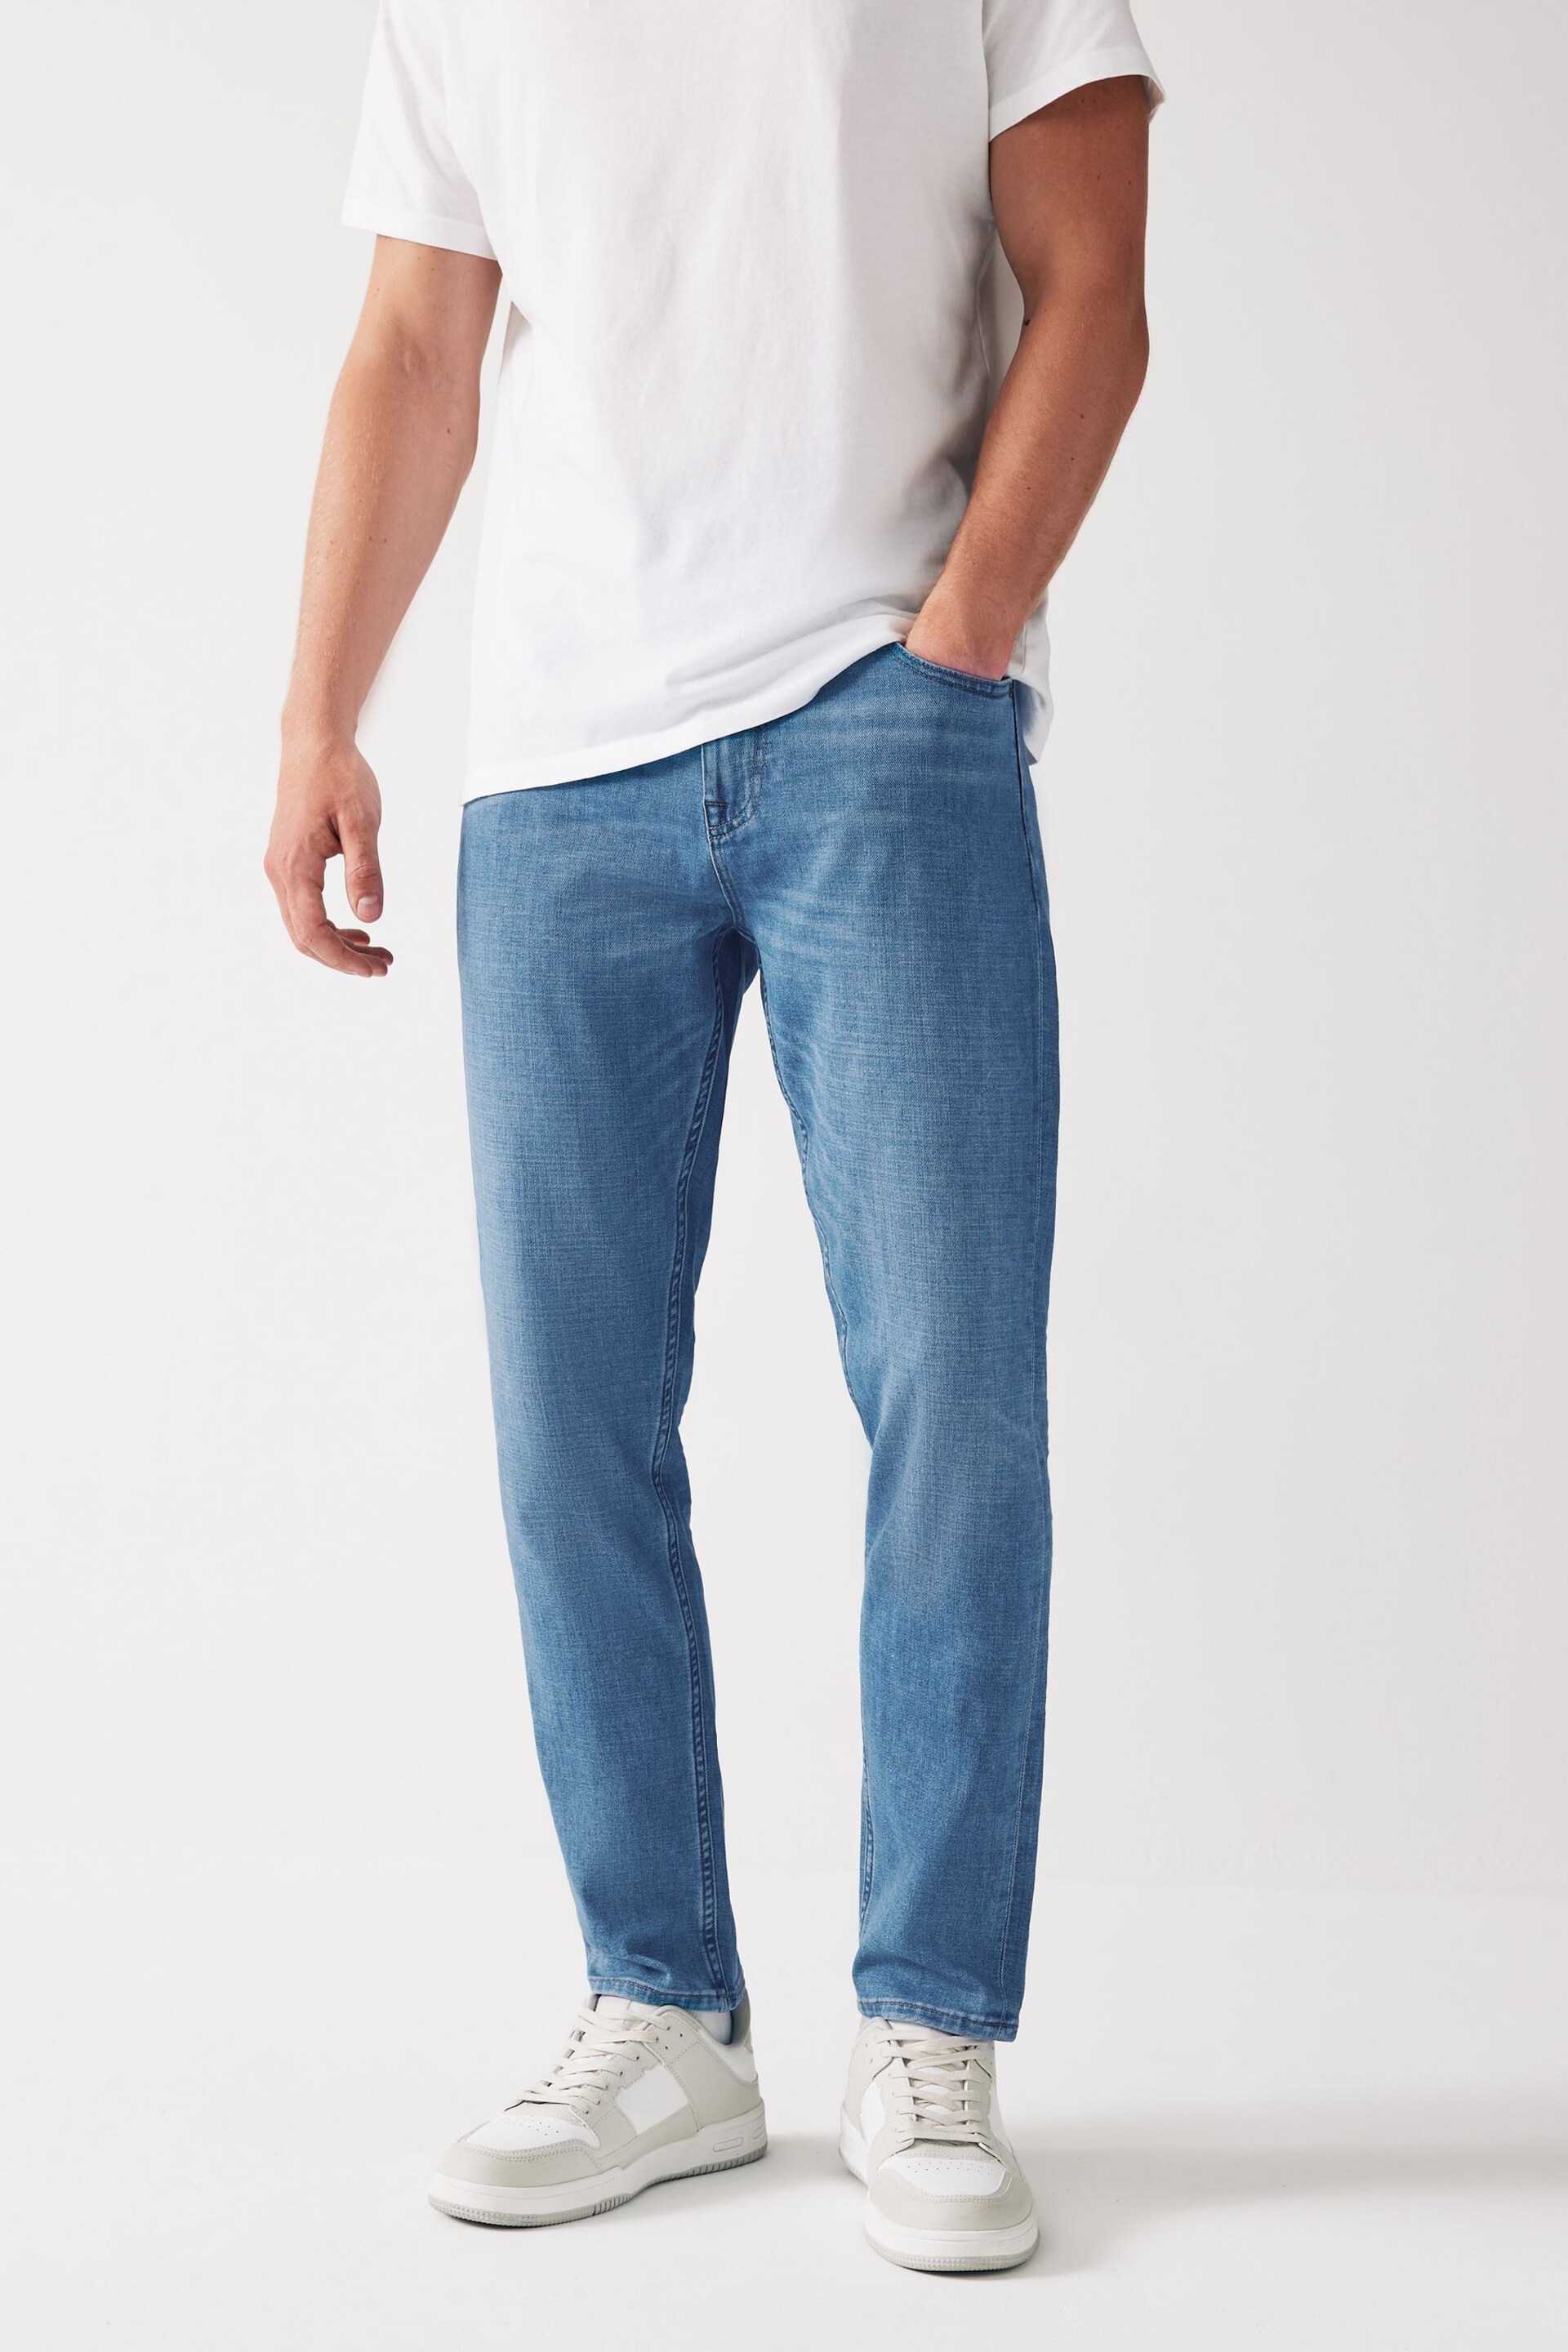 Blue Light Summerweight Jeans - Image 1 of 8